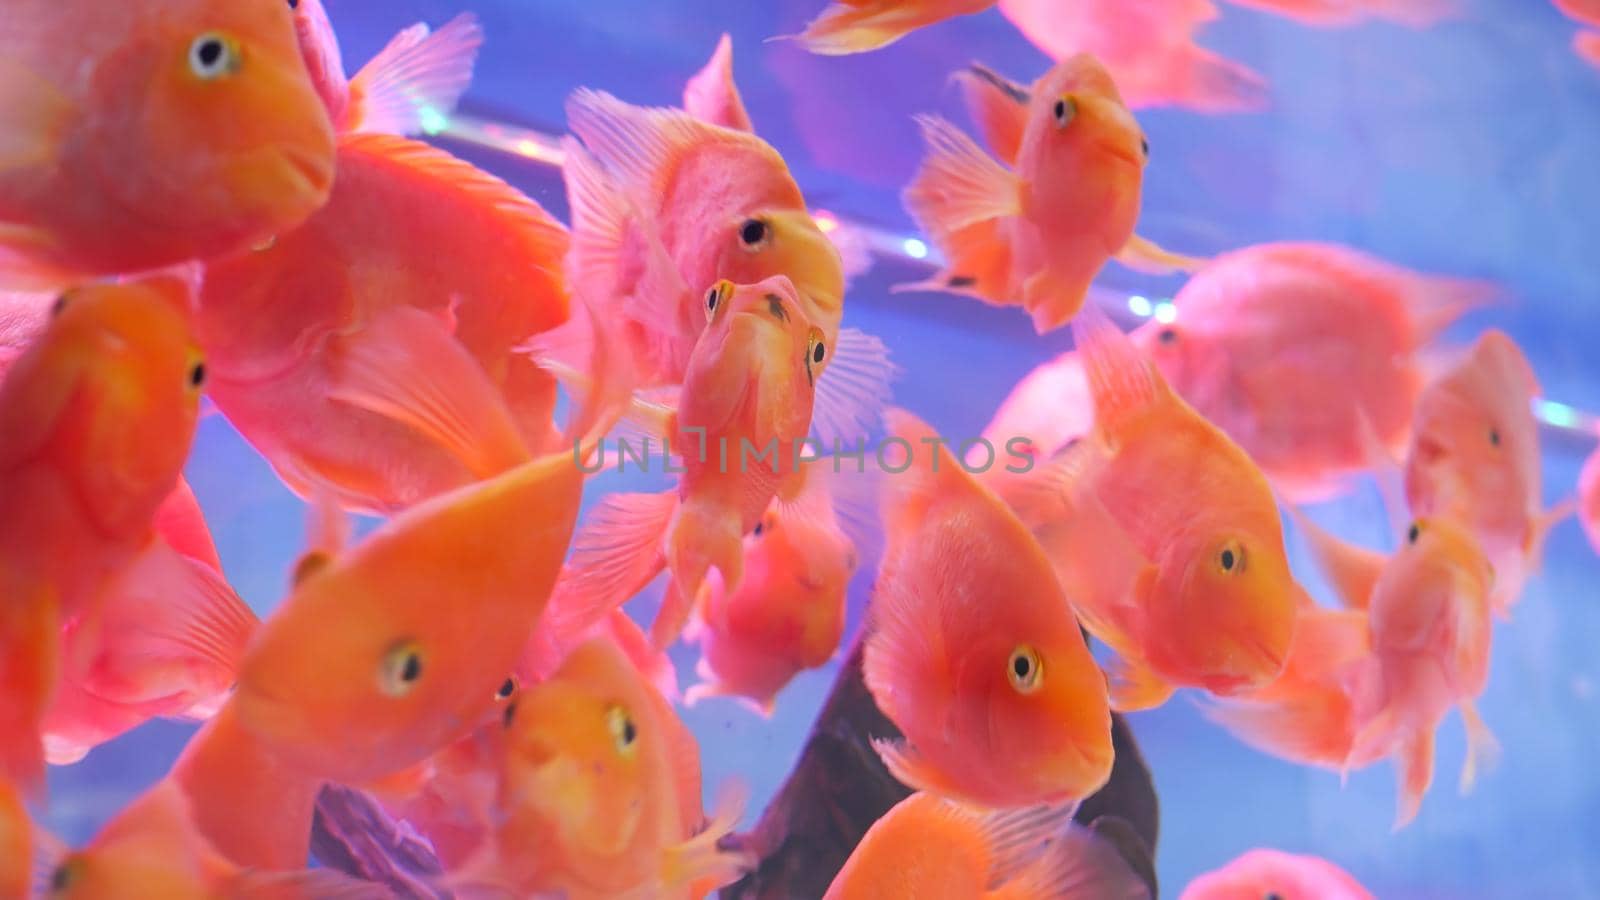 Diversity of tropical fishes in exotic decorative aquarium. Assortment in chatuchak fish market pet shops. Close up of colorful pets displayed on stalls. Variety for sale on counter, trading on bazaar by DogoraSun